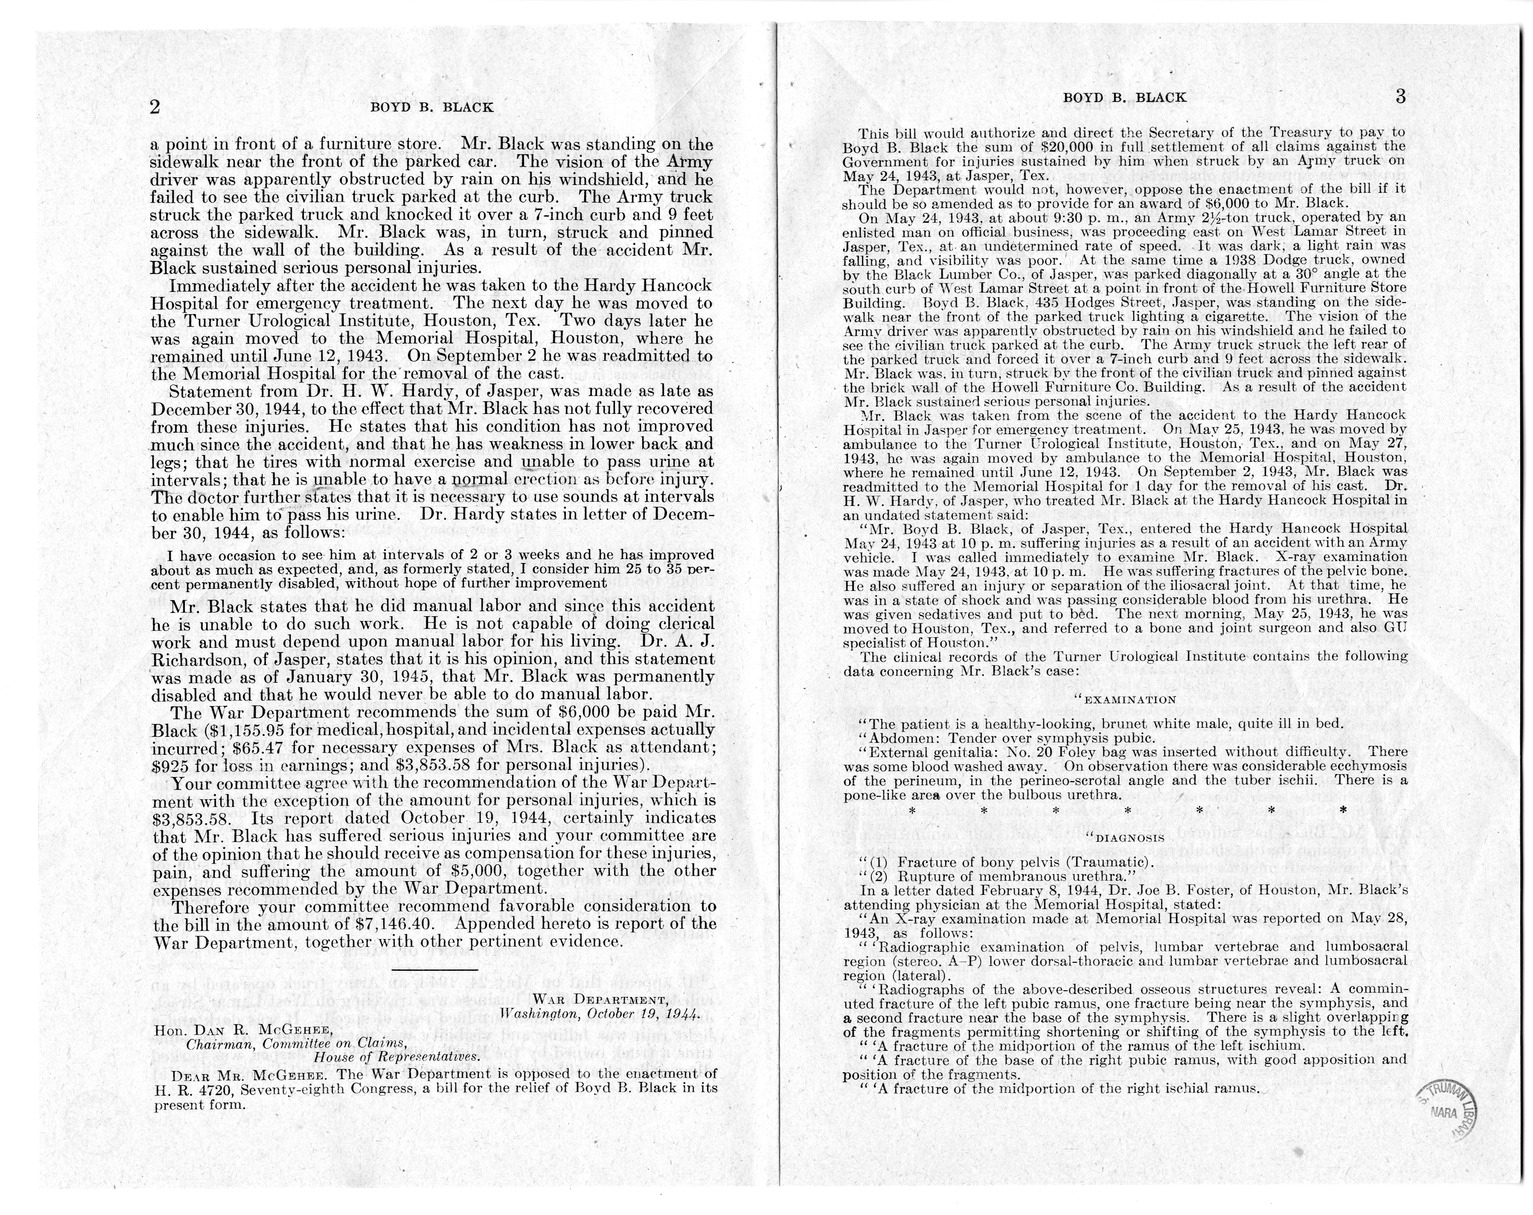 Memorandum from Frederick J. Bailey to M. C. Latta, H.R. 2006, For the Relief of Boyd B. Black, with attachments